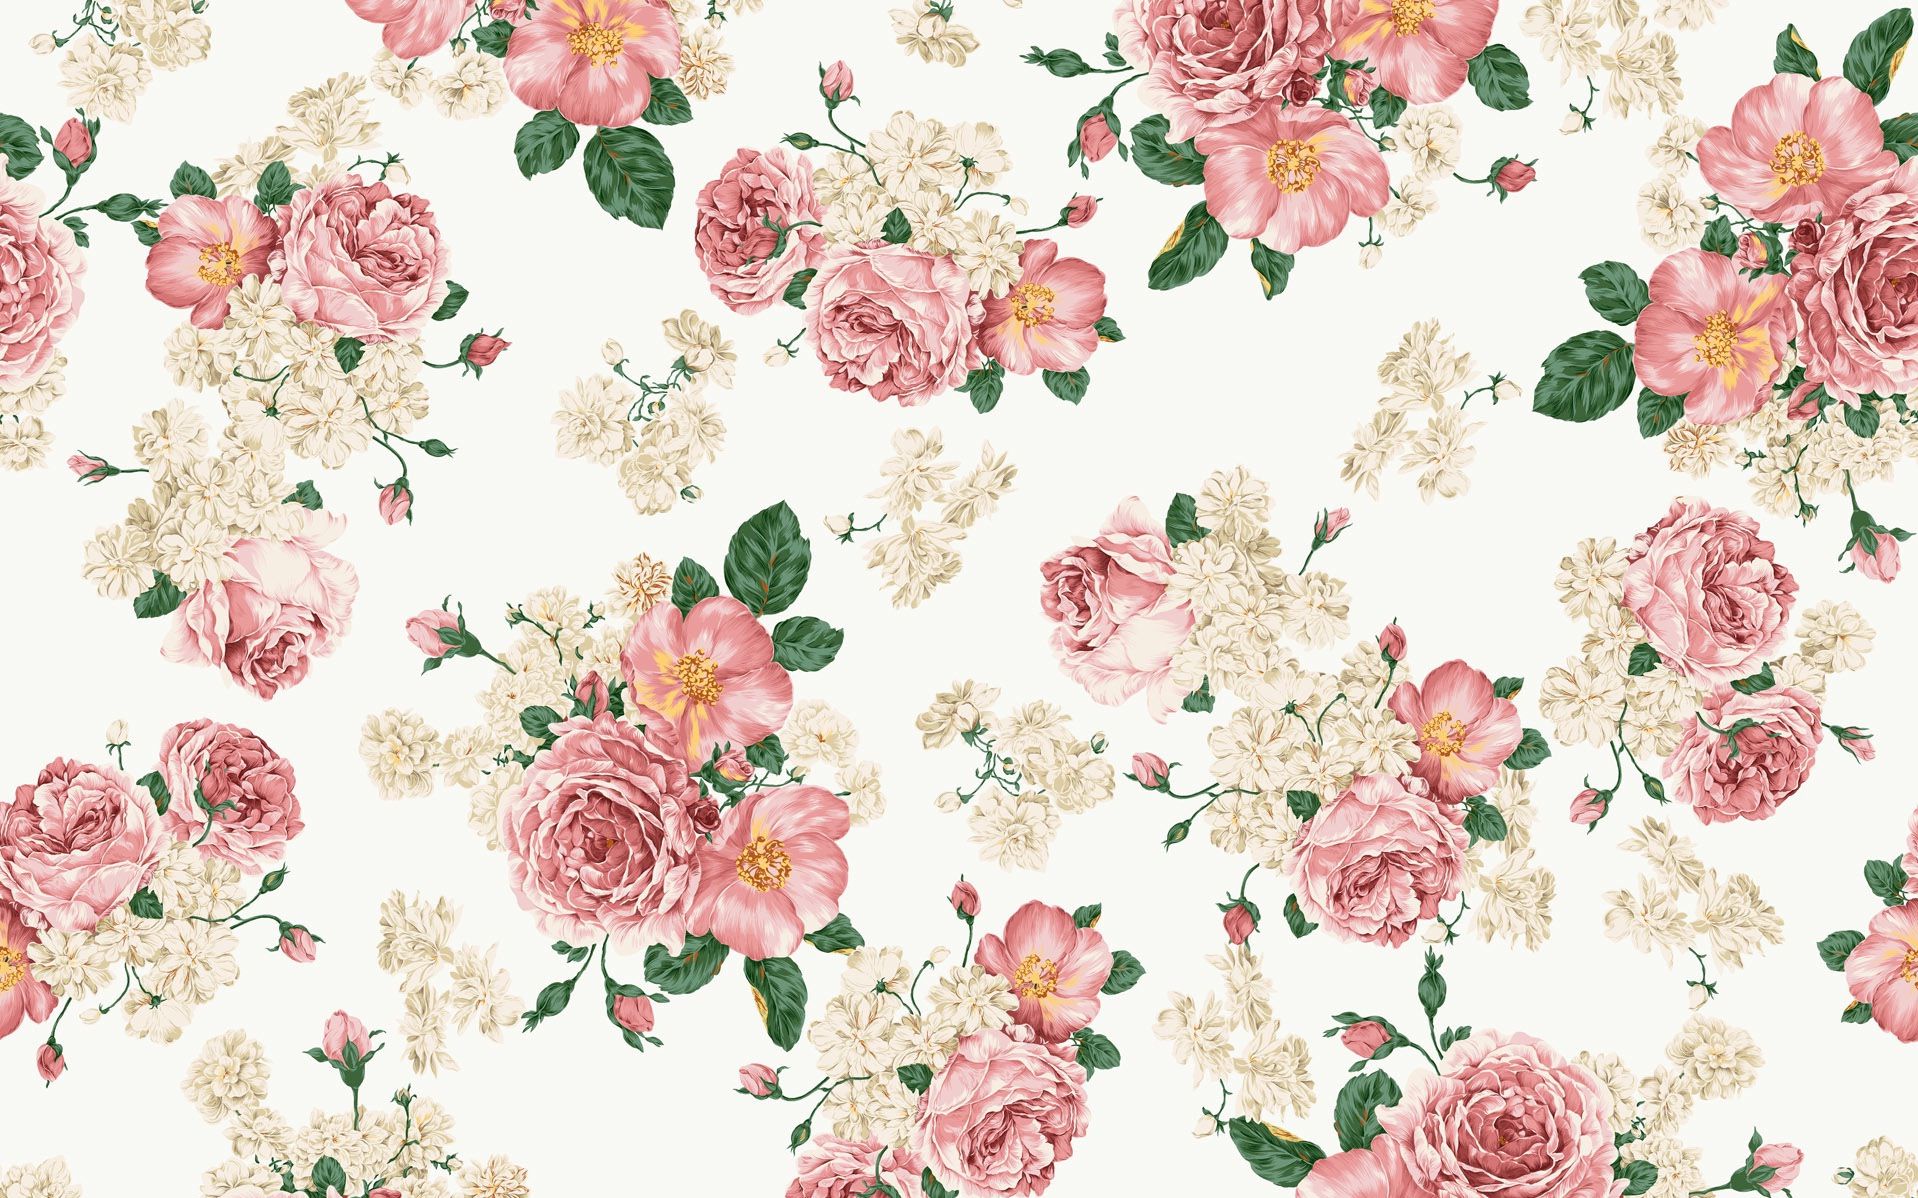 Pictures > floral tumblr wallpapers